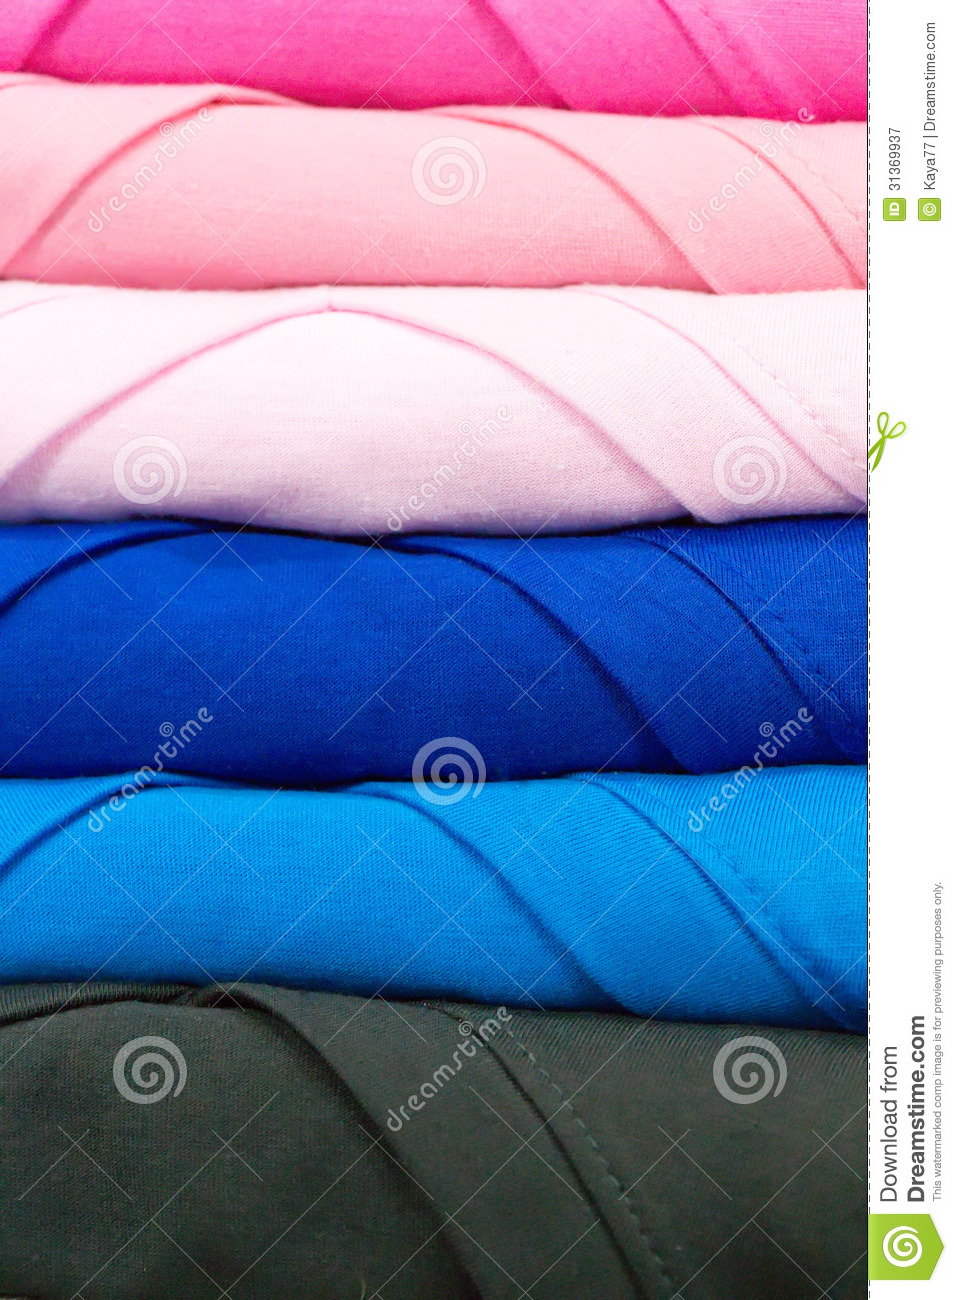 Folded Clothes Royalty Free Stock Photography   Image  31369937